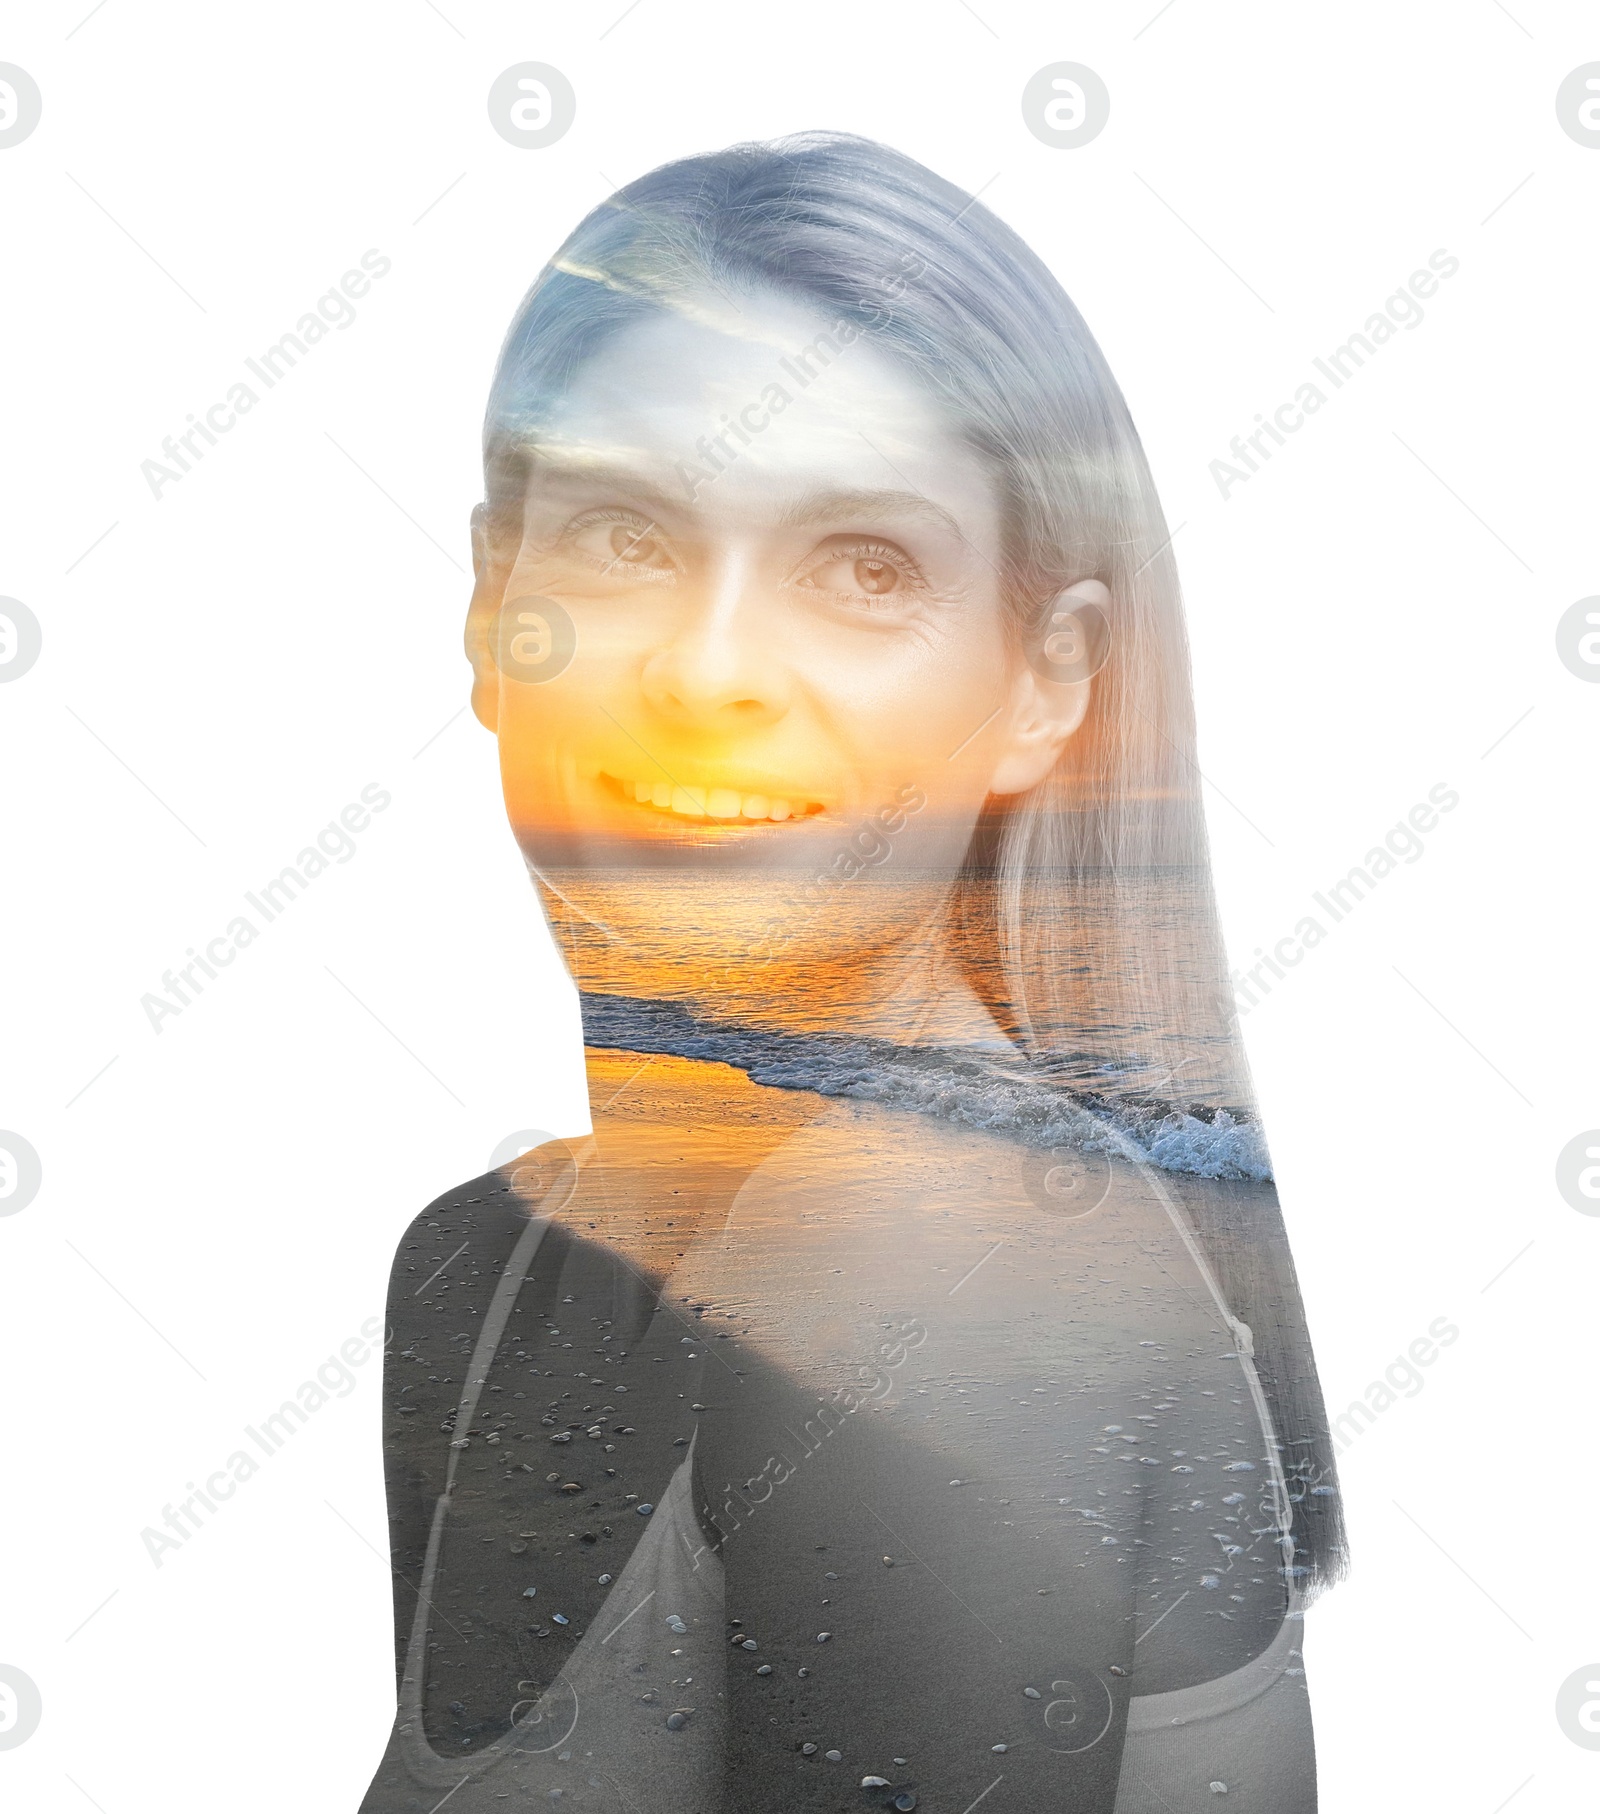 Image of Beautiful woman and seascape at sunset on white background, double exposure